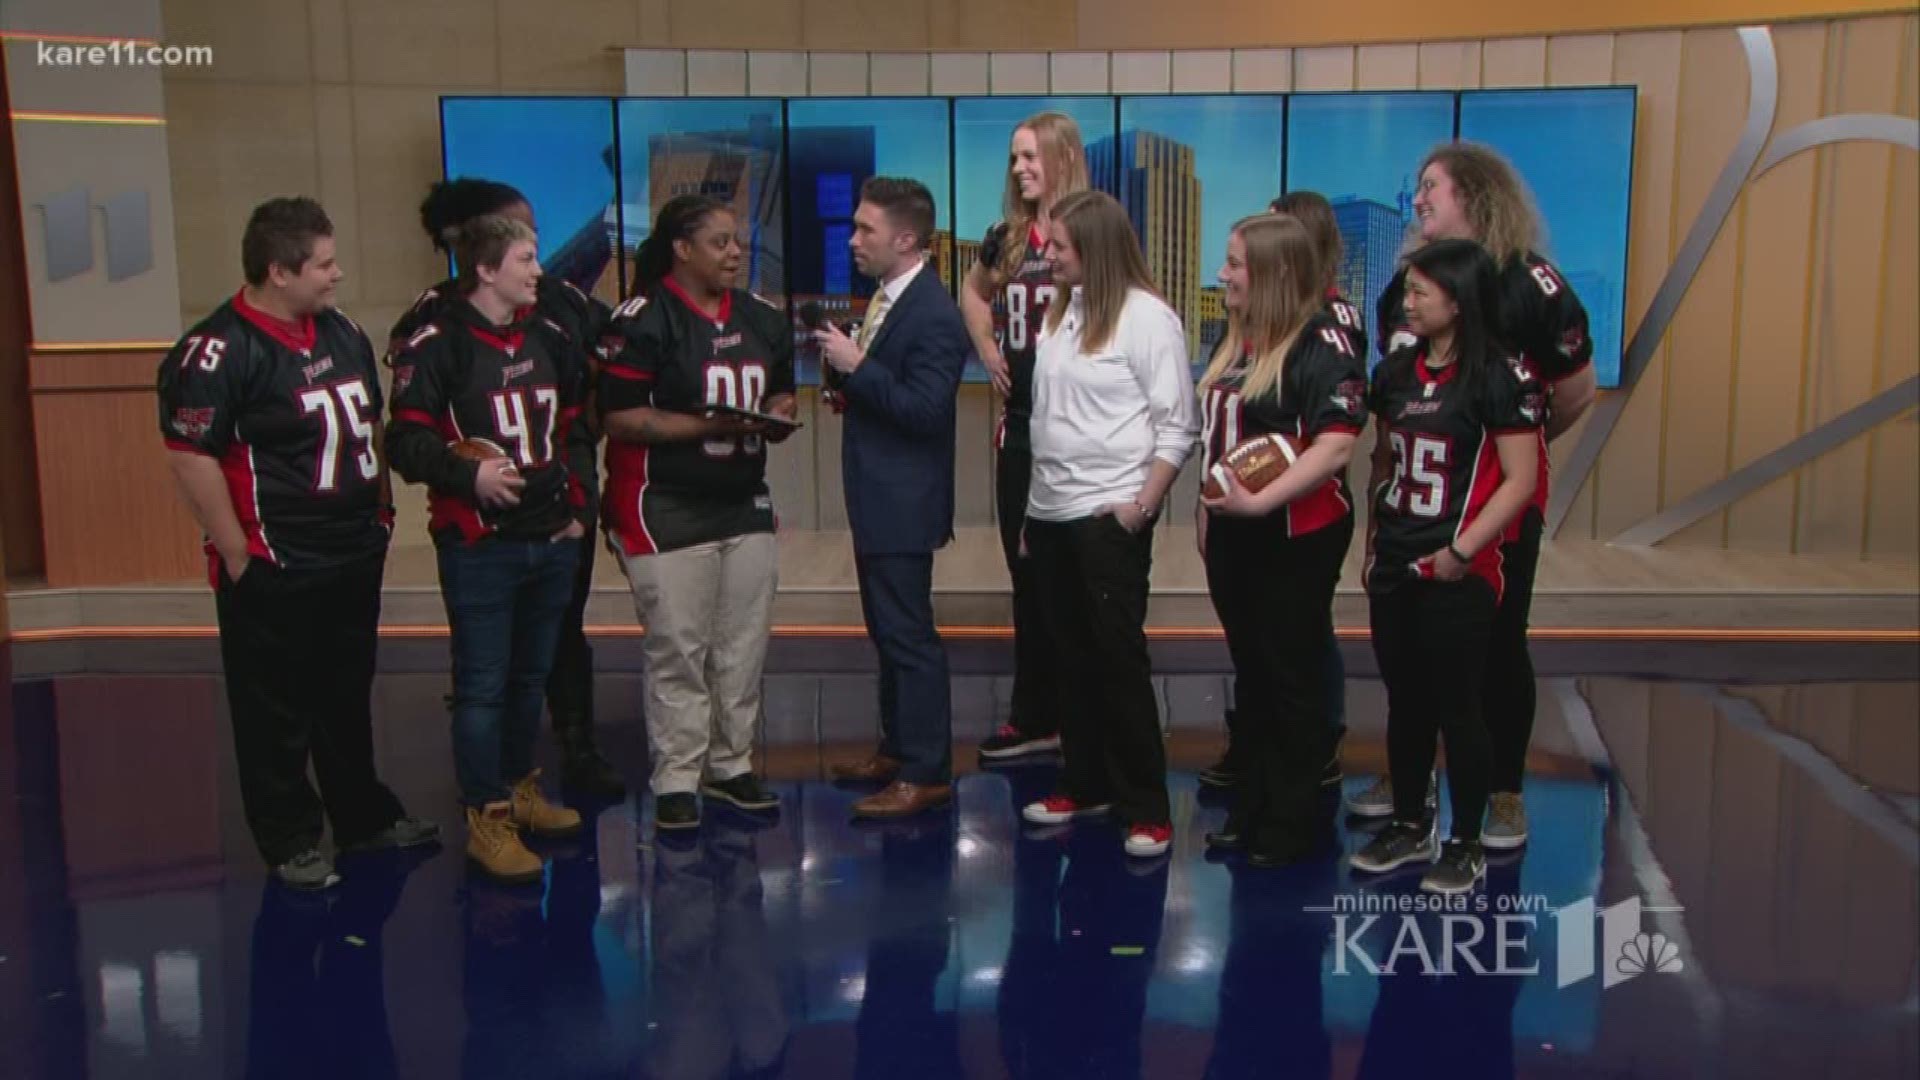 The nation's longest running women's tackle football team is gearing up for its 2018 season home opener.